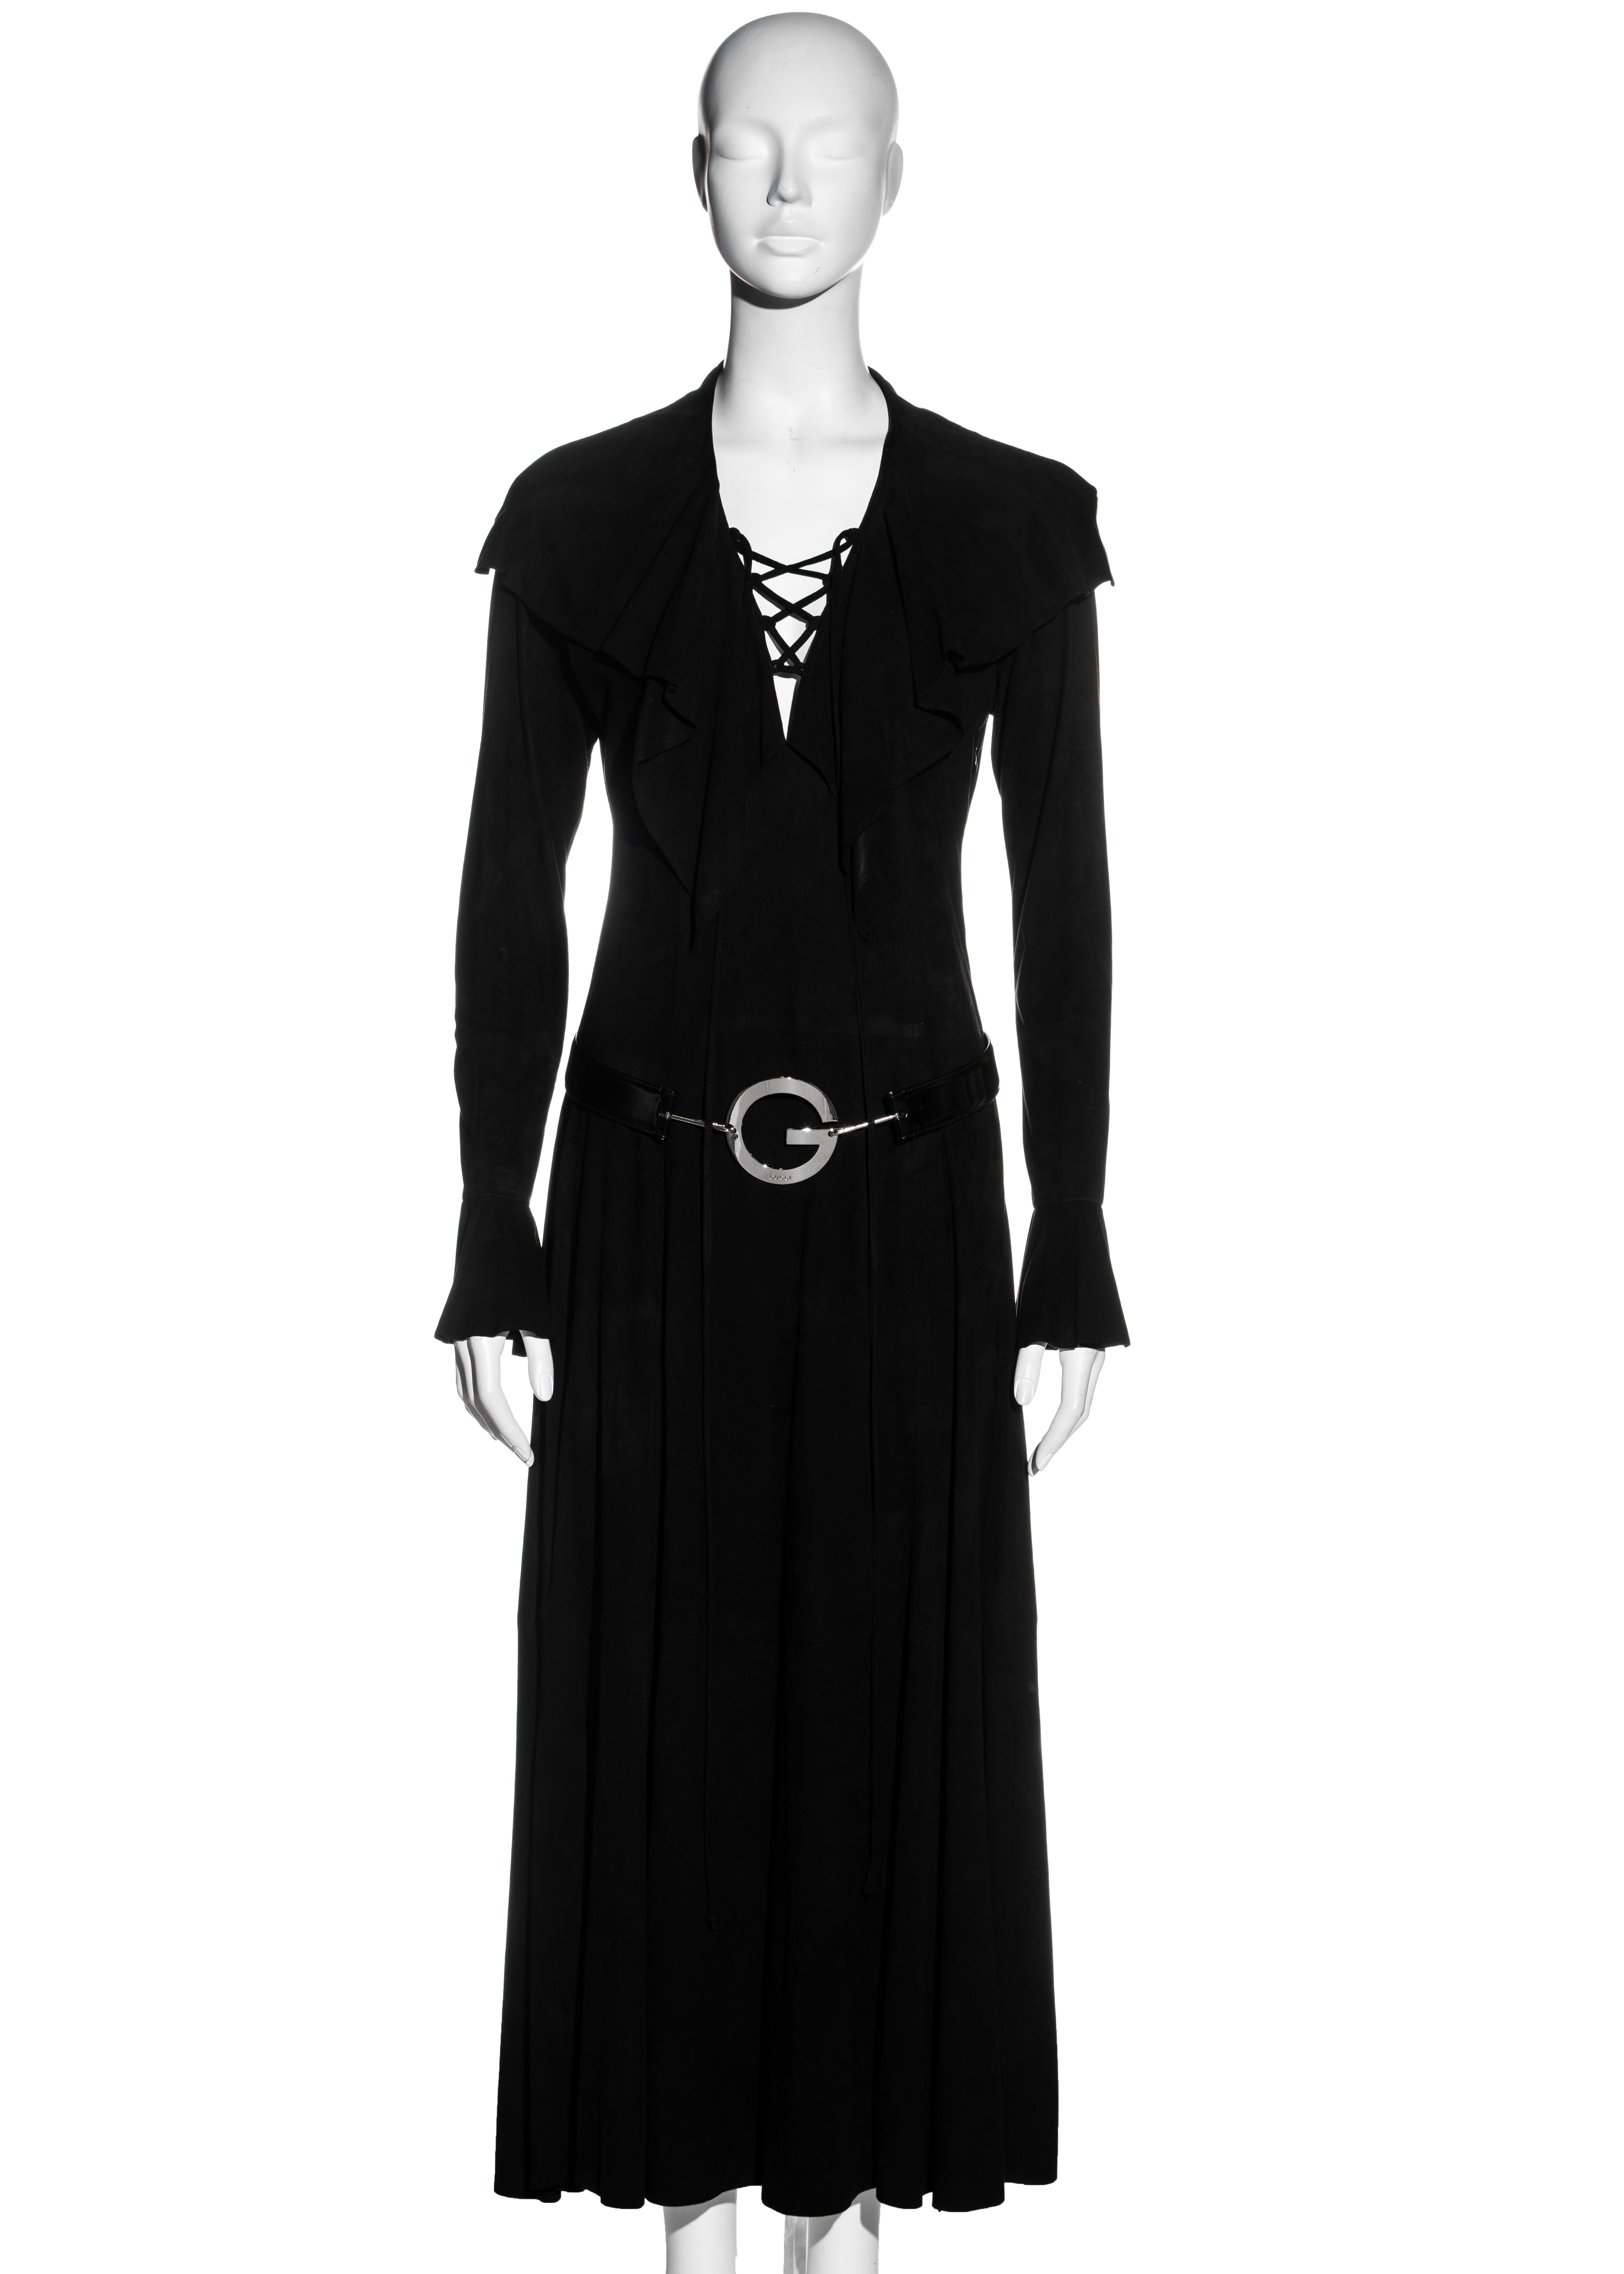 ▪ Gucci suede lace-up maxi dress and belt 
▪ Designed by Tom Ford 
▪ Deep v-neck with leather lace up fastening 
▪ Large cape collar with natural edge 
▪ Bishop sleeves with ruffled cuffs 
▪ Gold 'GG' etched buttons 
▪ Patent leather hip belt with